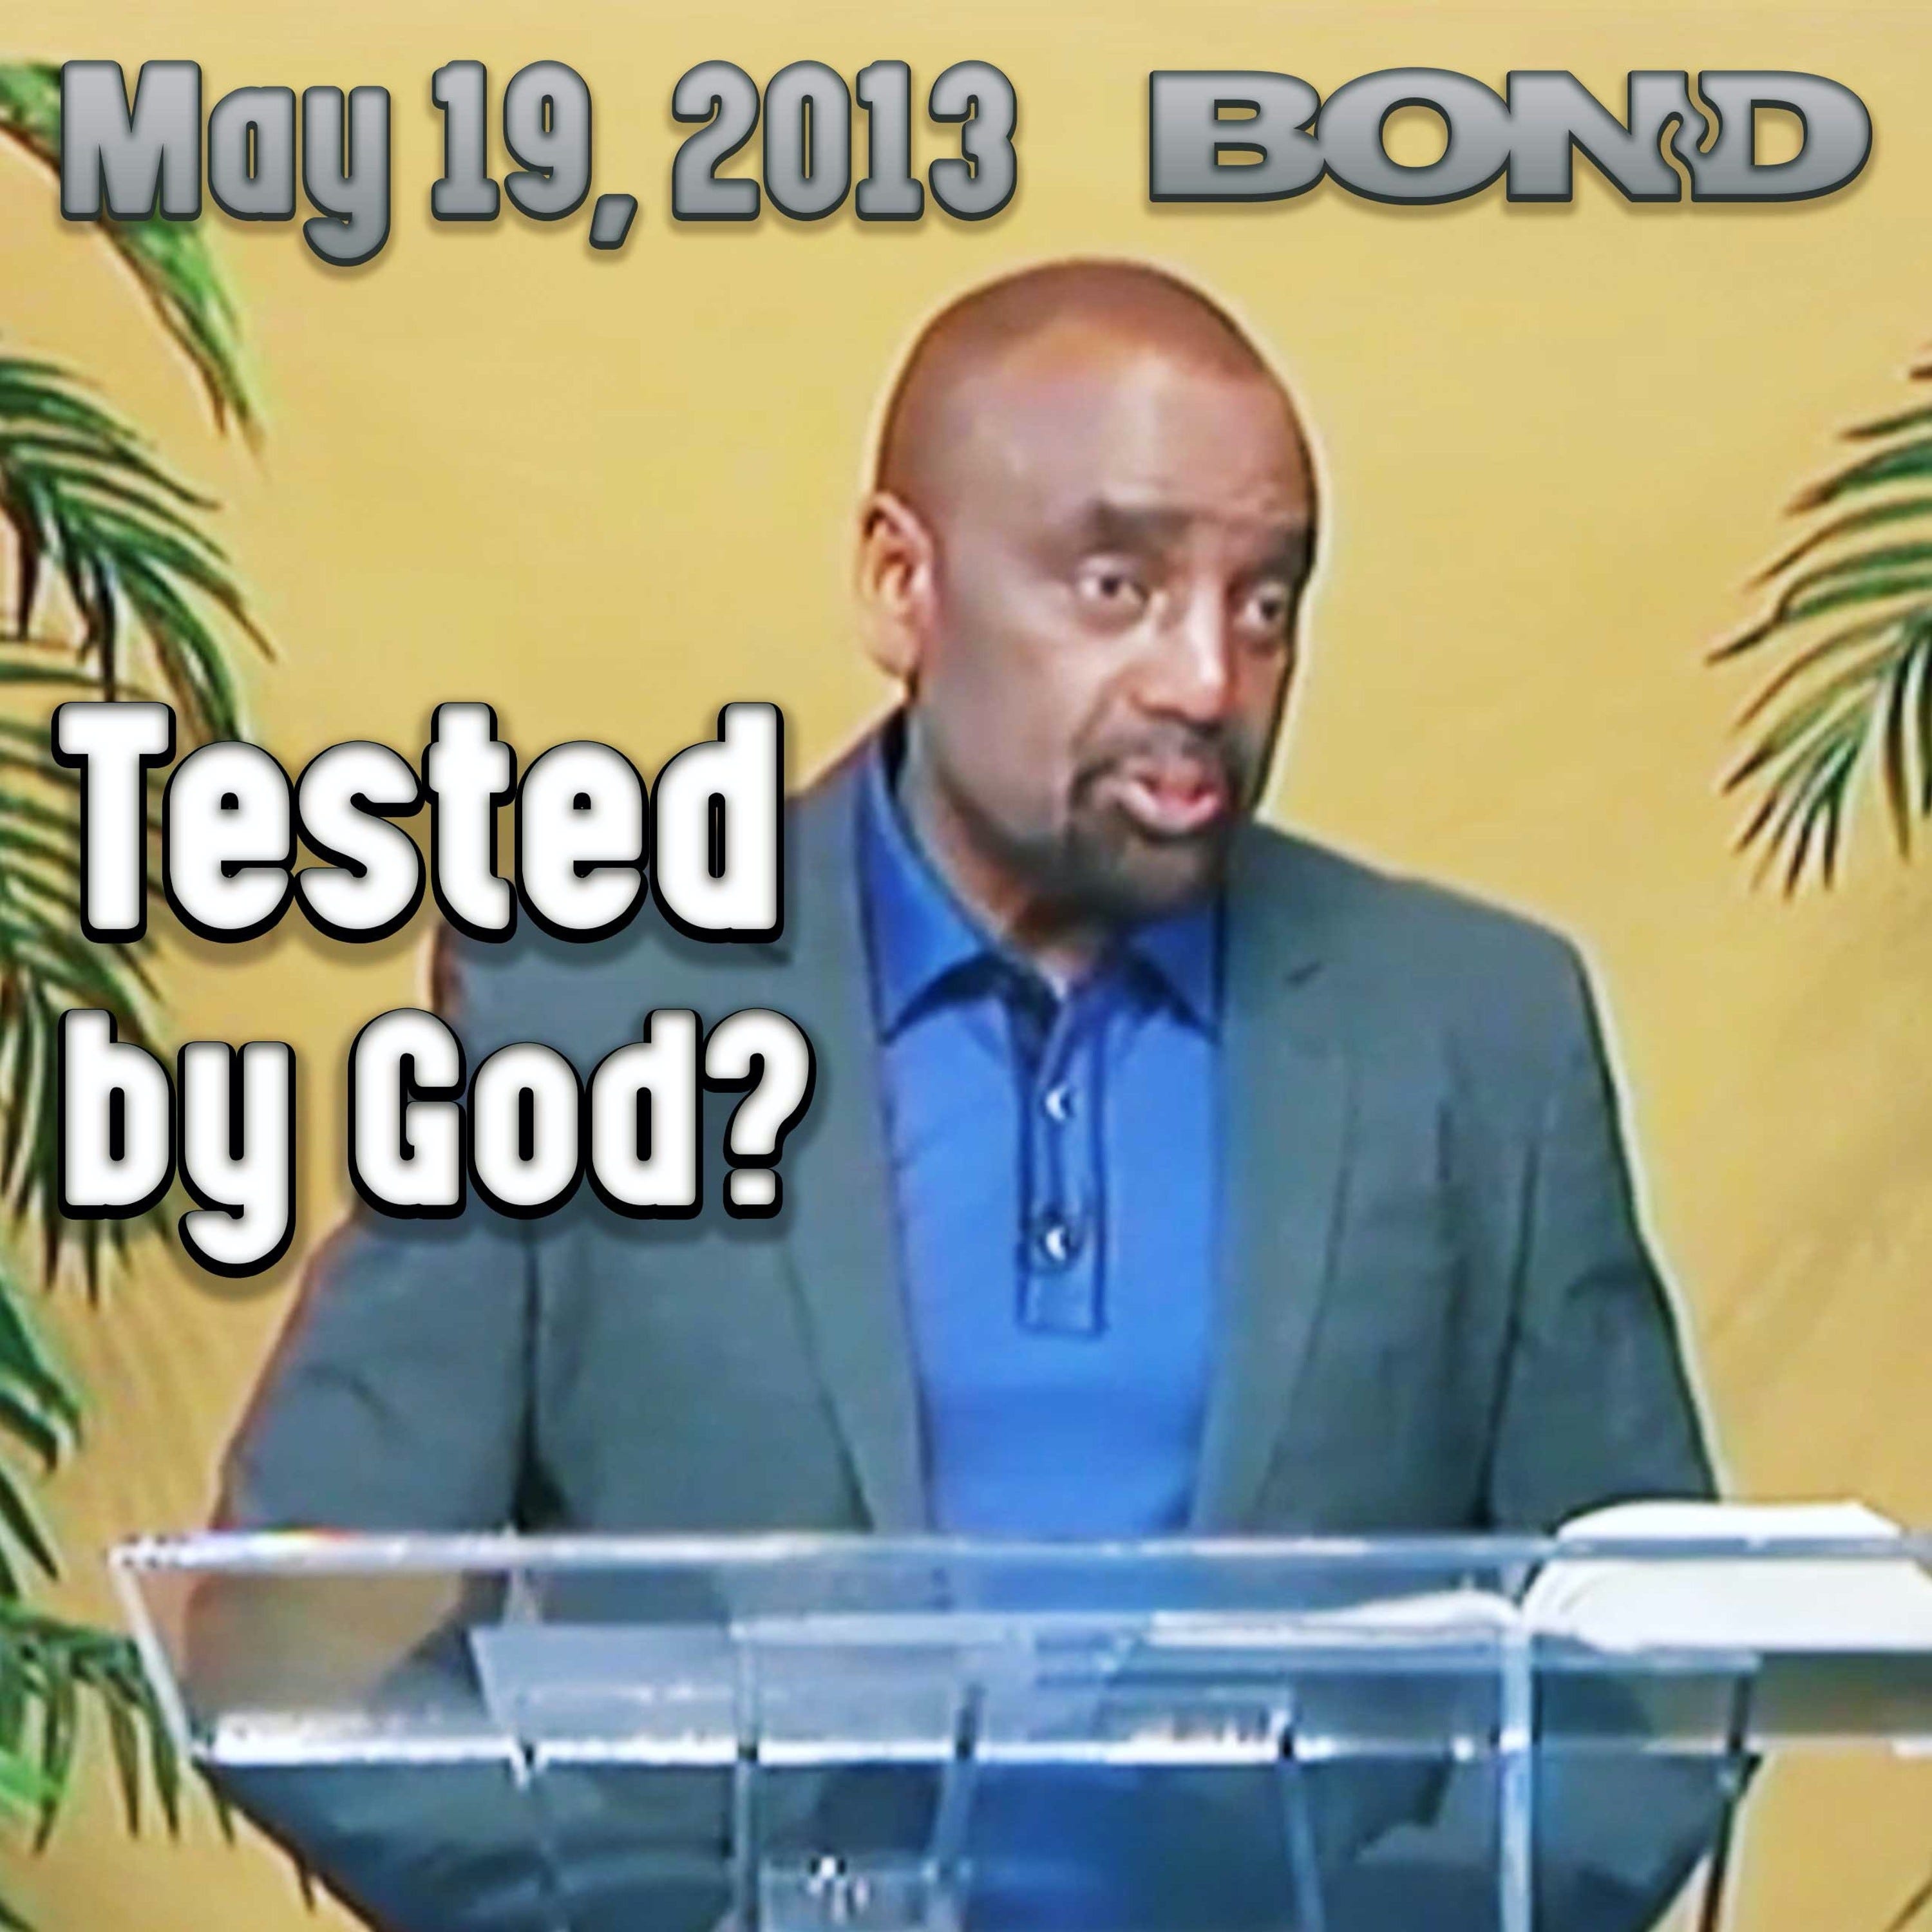 05/19/13 Is There a Difference Between Being Tempted and Being Tested?